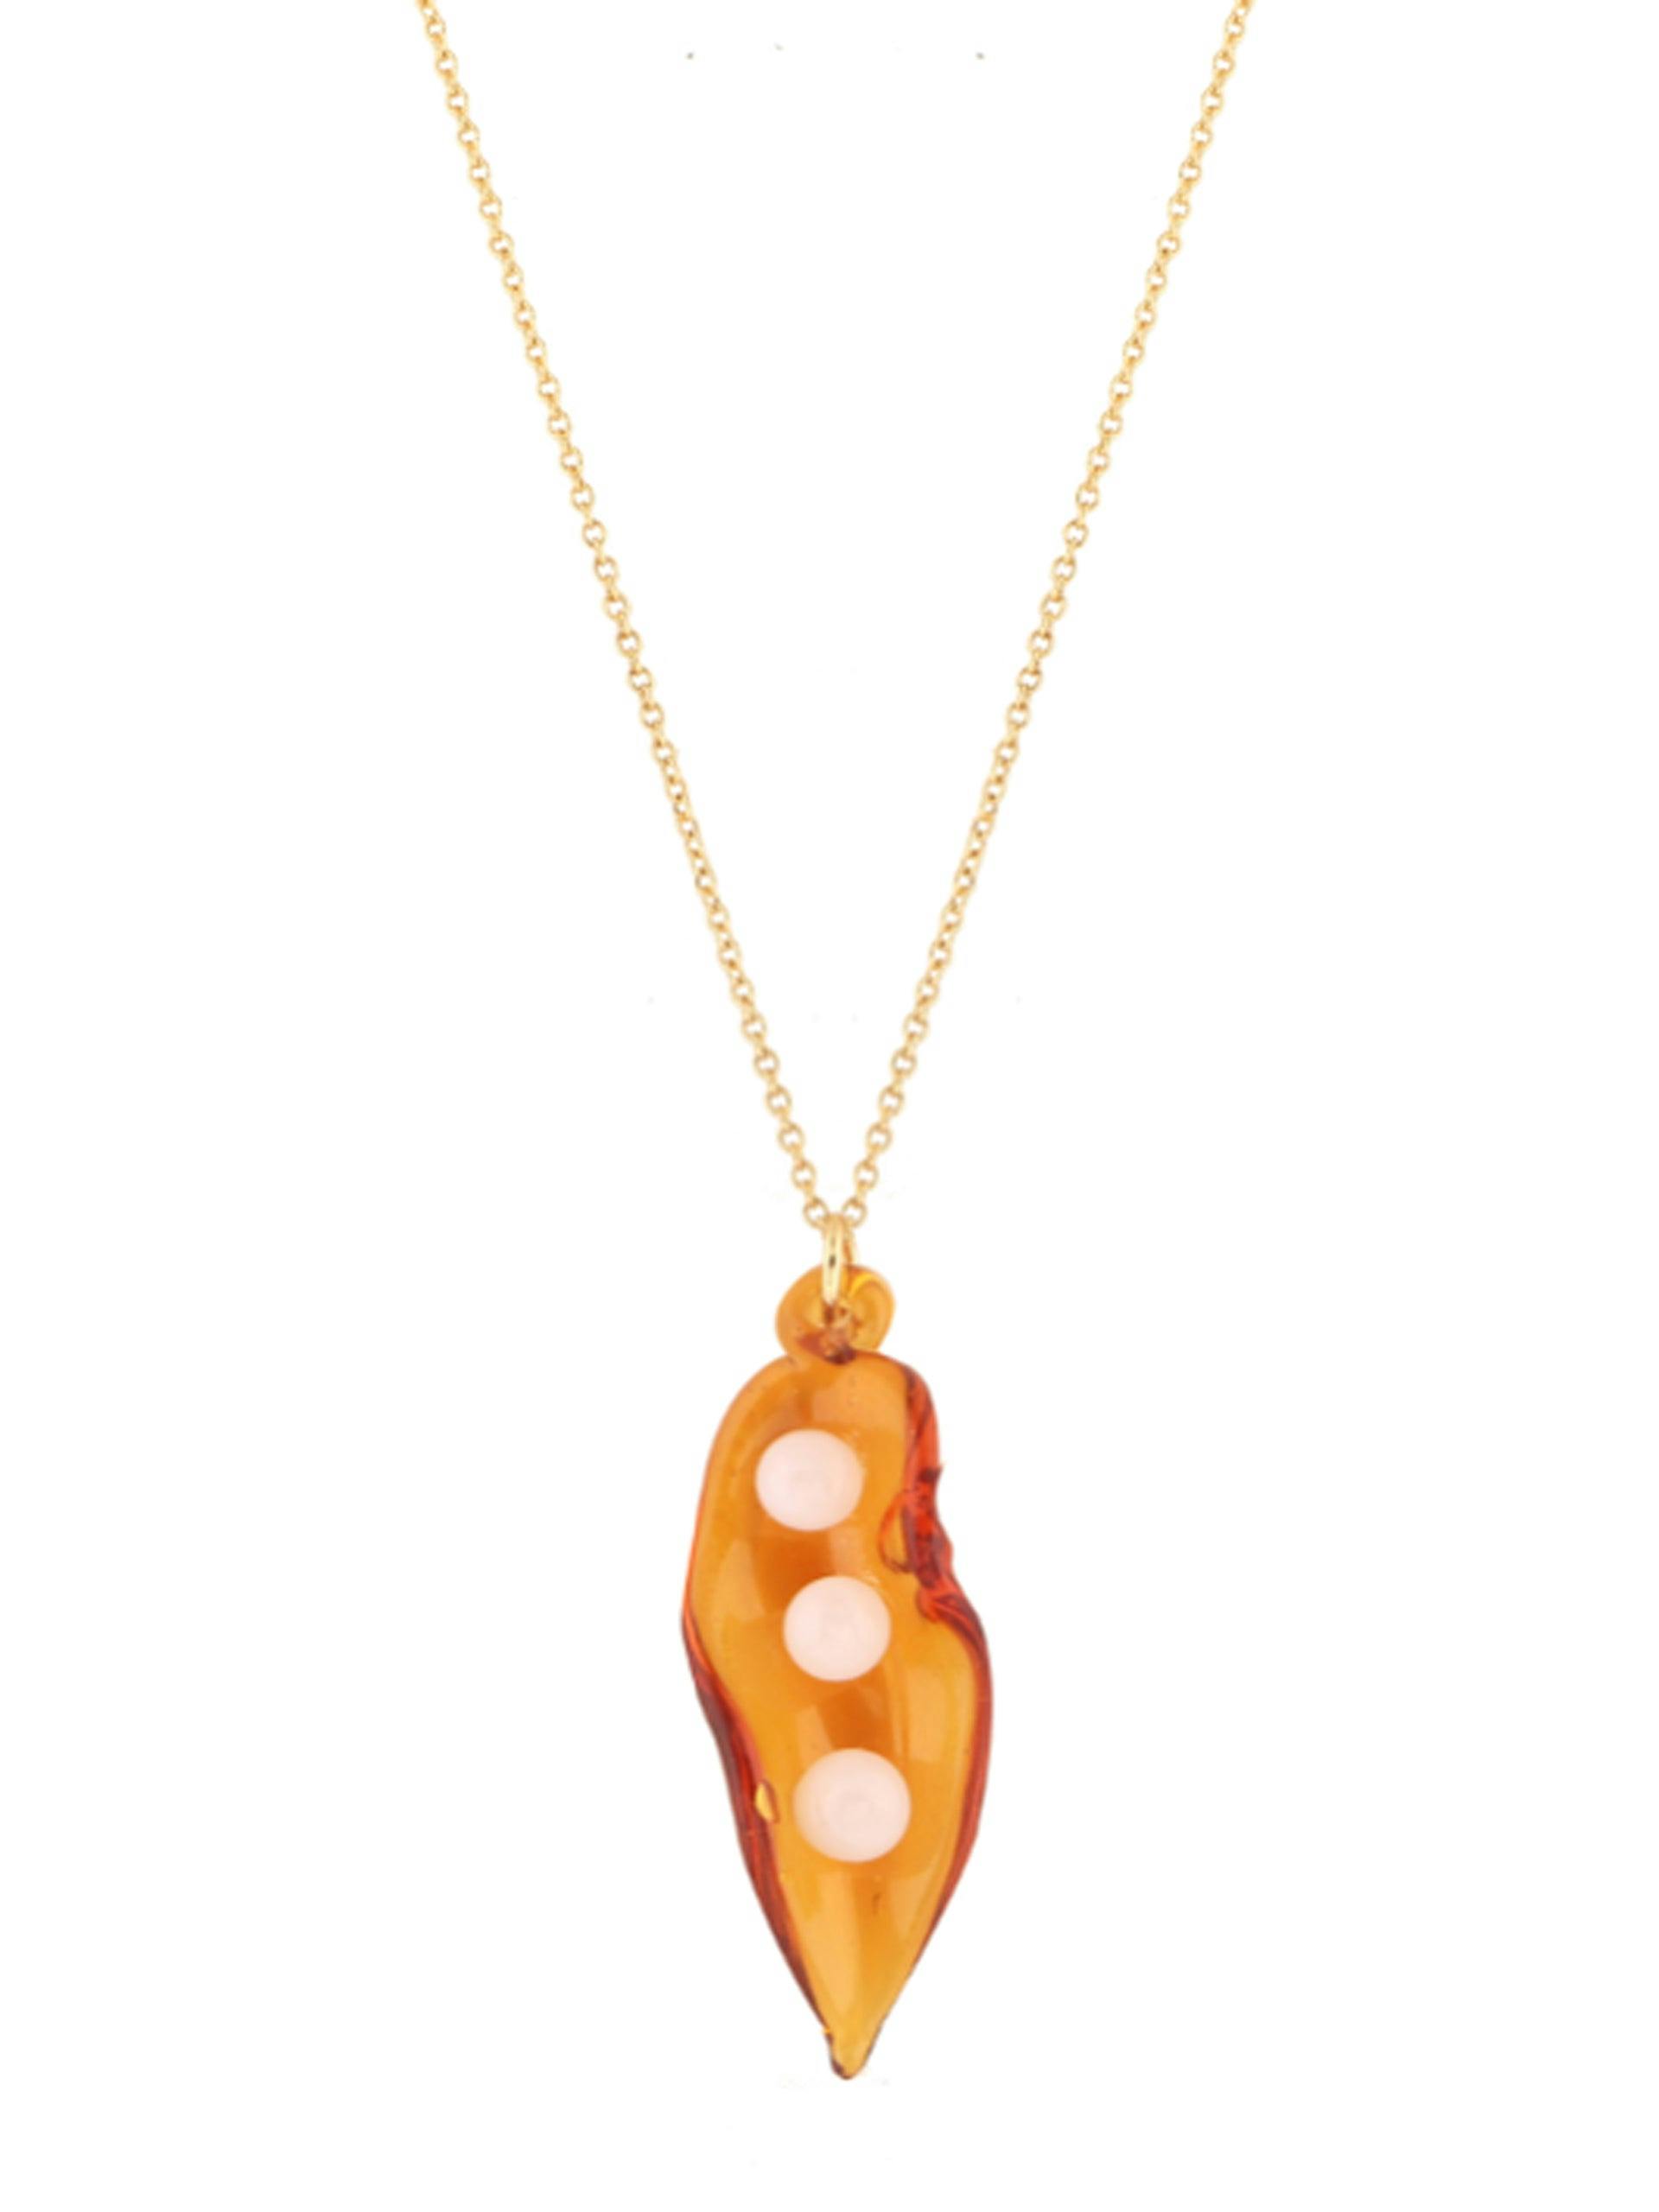 Extra large amber Pea Pod necklace